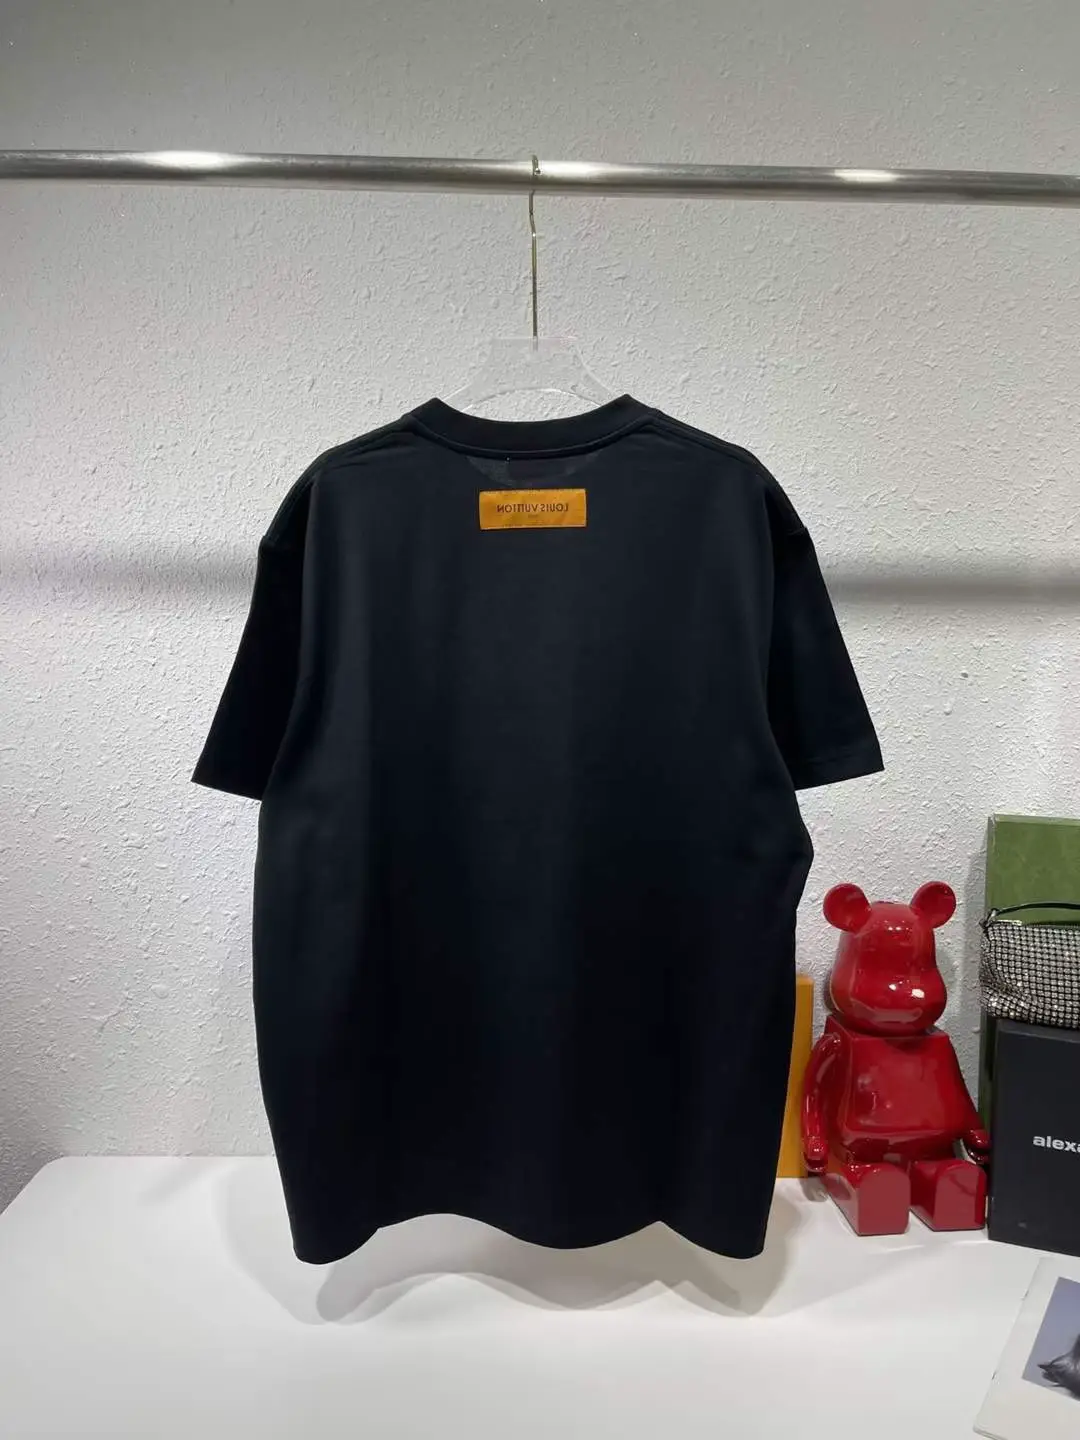 LOUIS VUITTON 23 COTTON OVERSIZE T SHIRT, Gallery posted by Dico_Italy